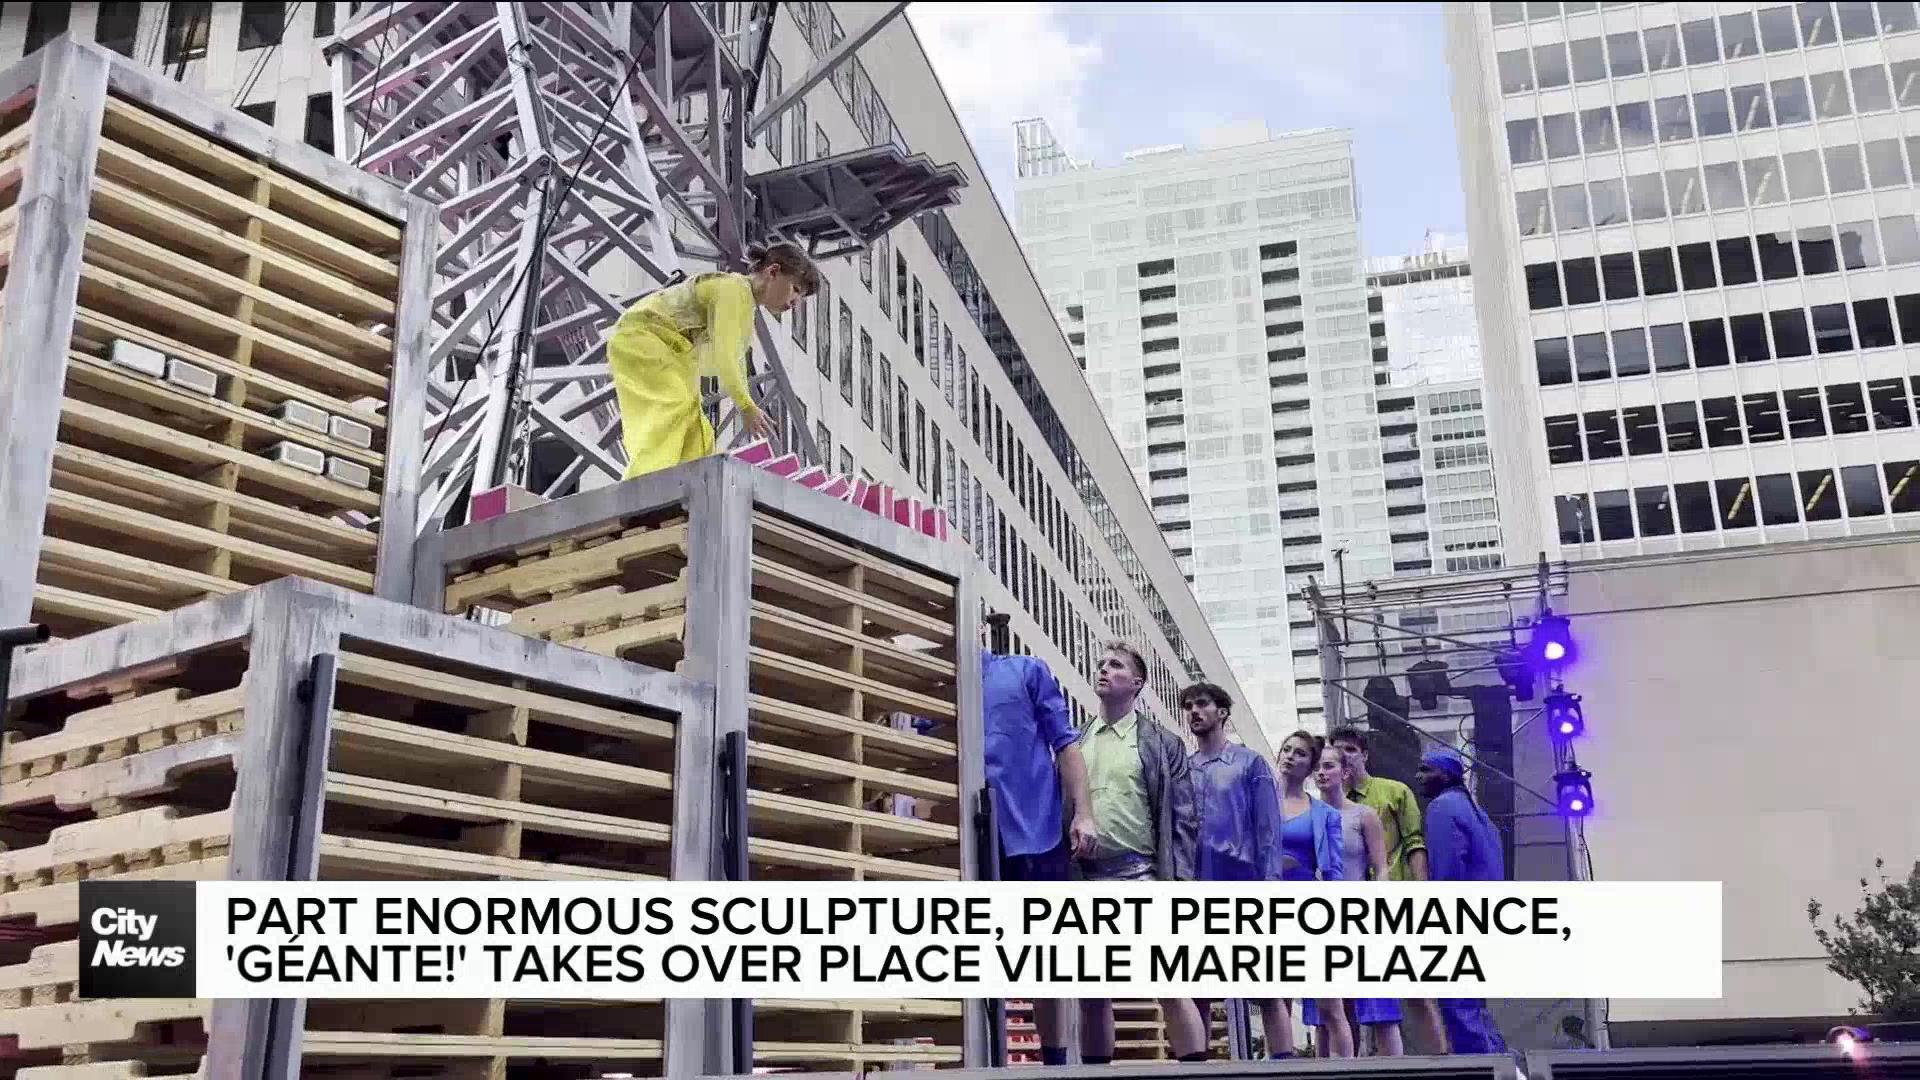 GÉANTE! spectacle takes over Place Ville Marie once again